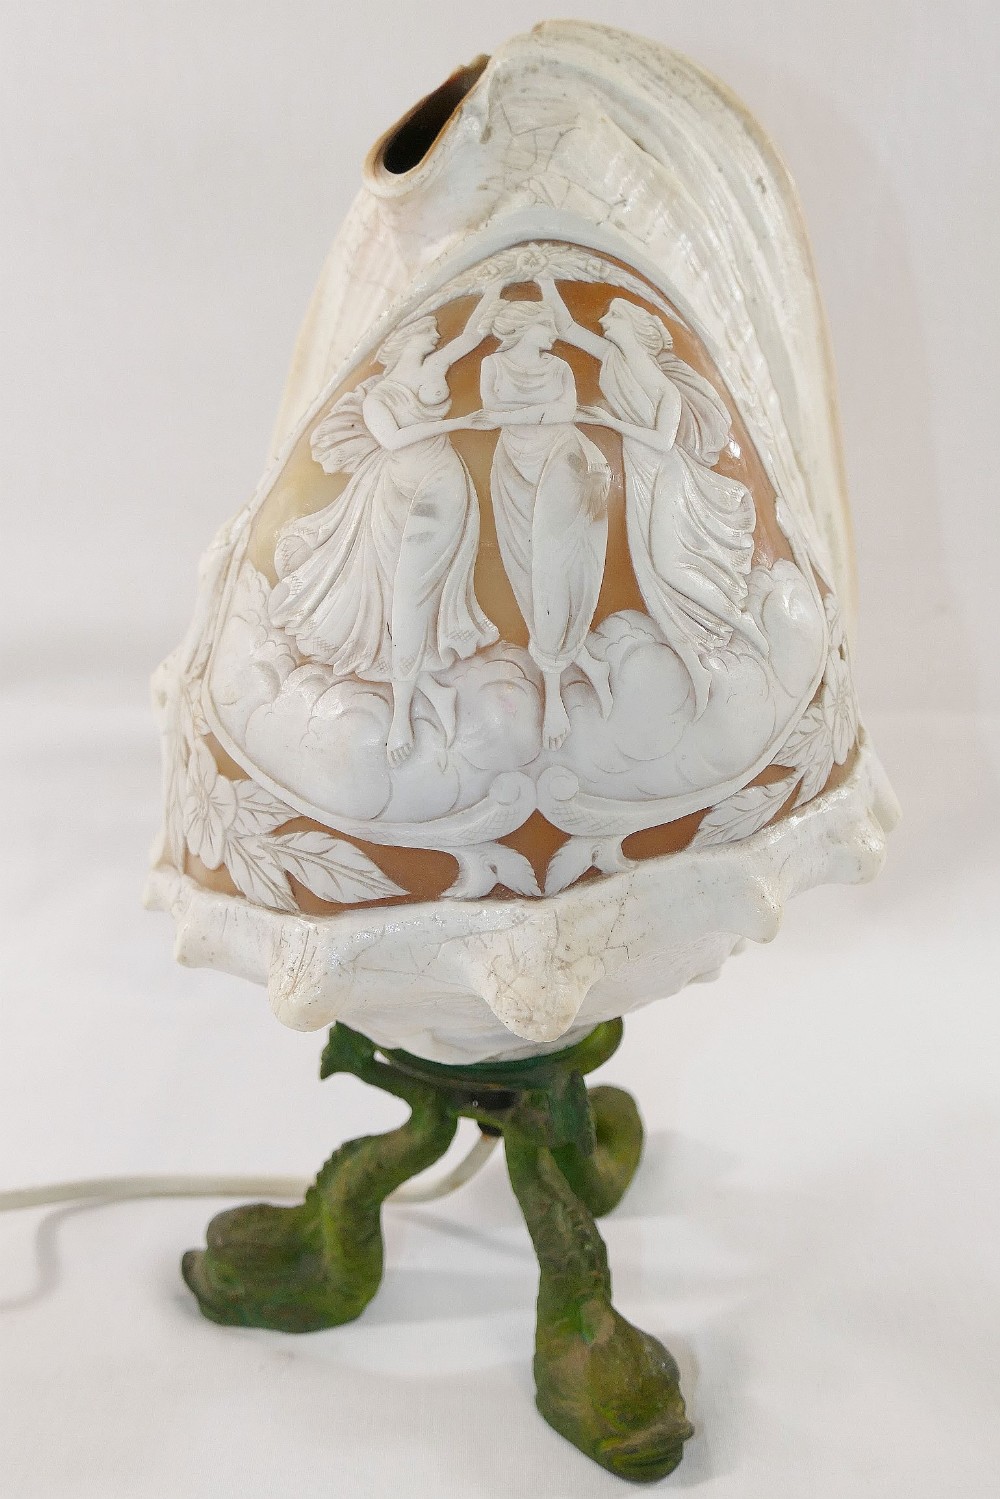 A large Queen helmet conch shell cameo carved with a classical scene of the three graces, mounted to